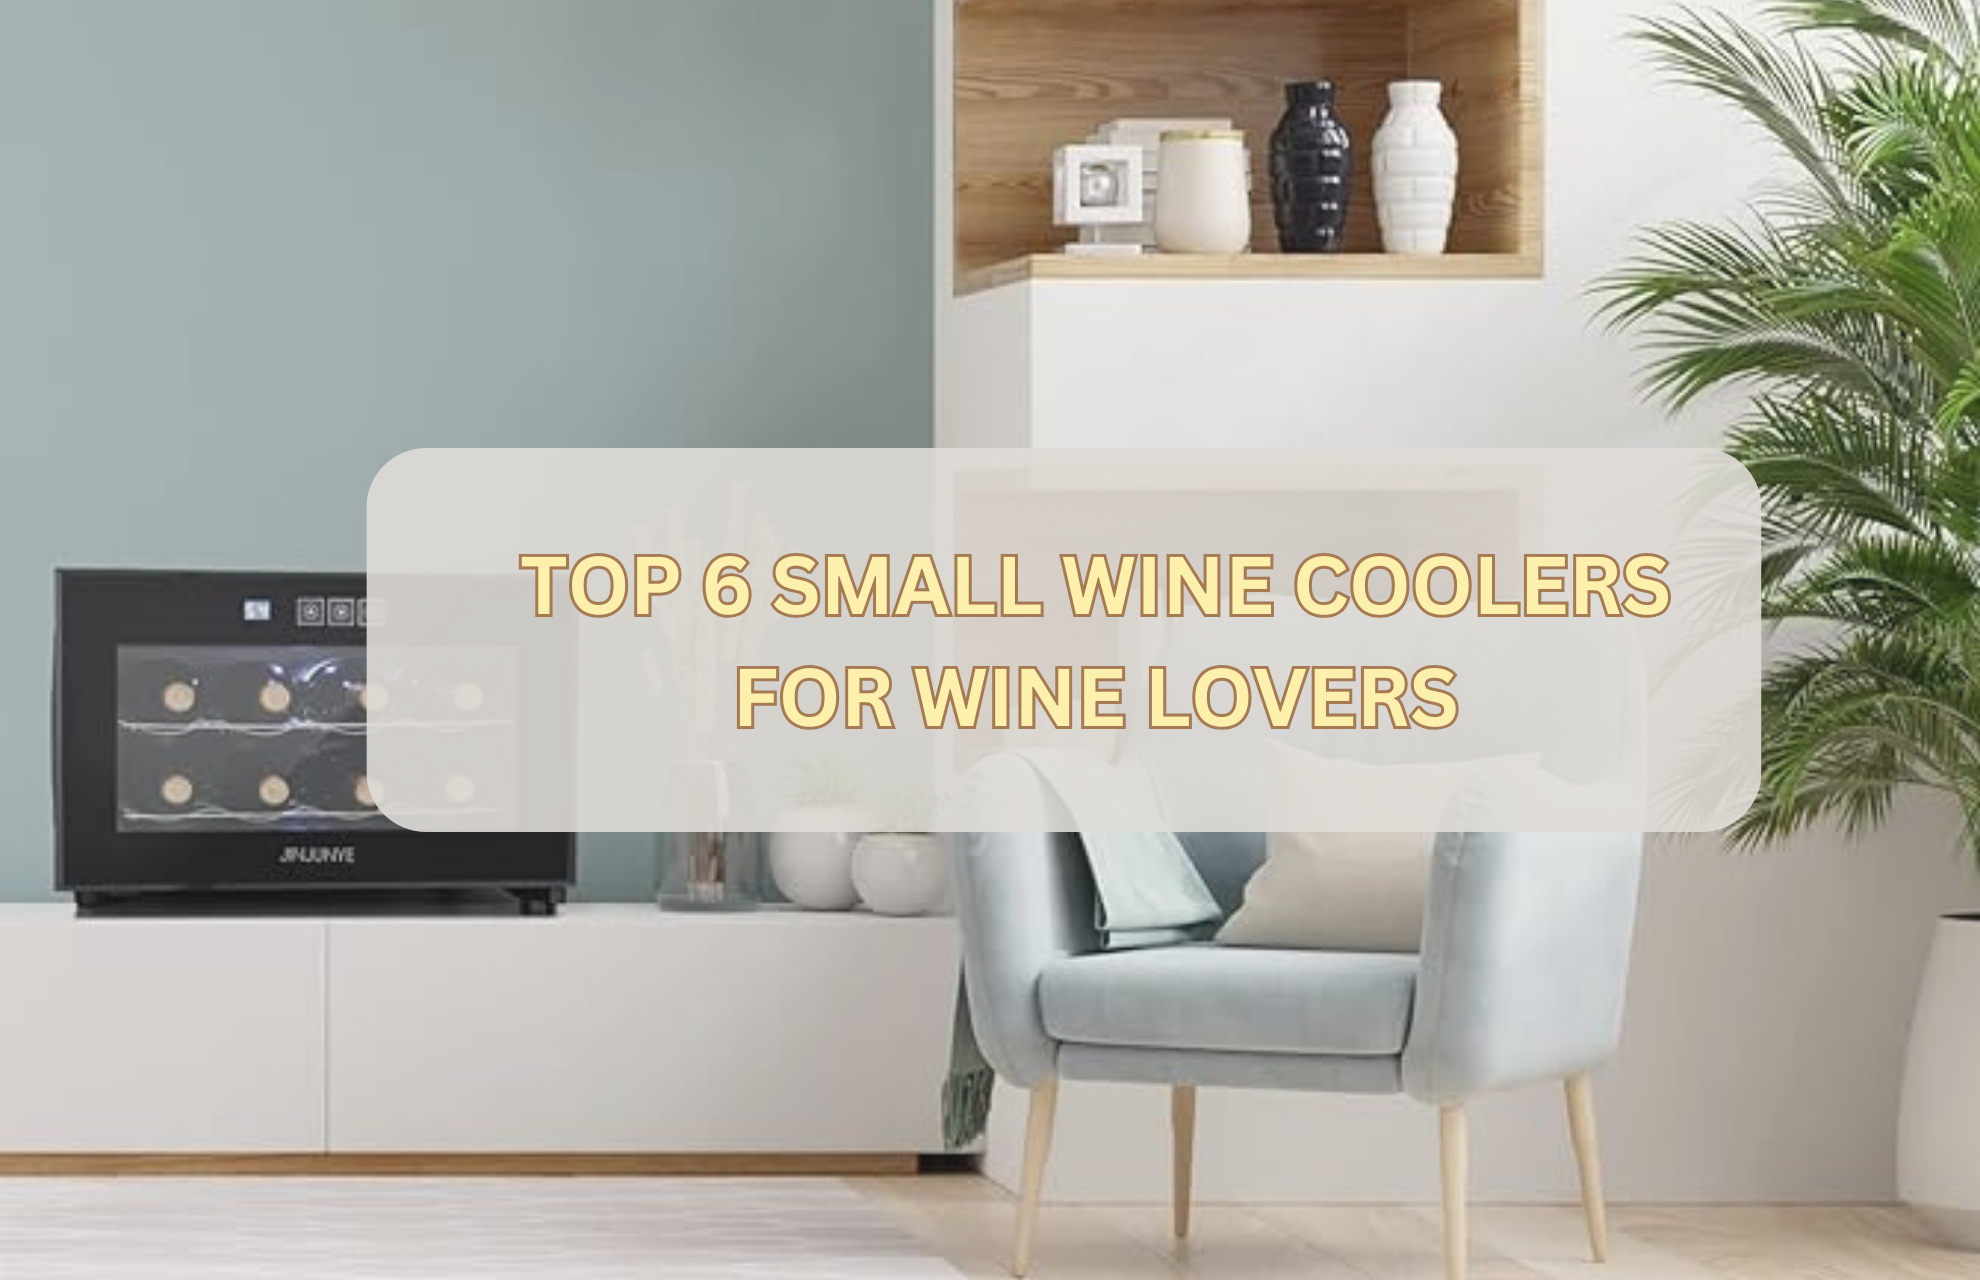 TOP 6 SMALL WINE COOLERS FOR WINE LOVERS